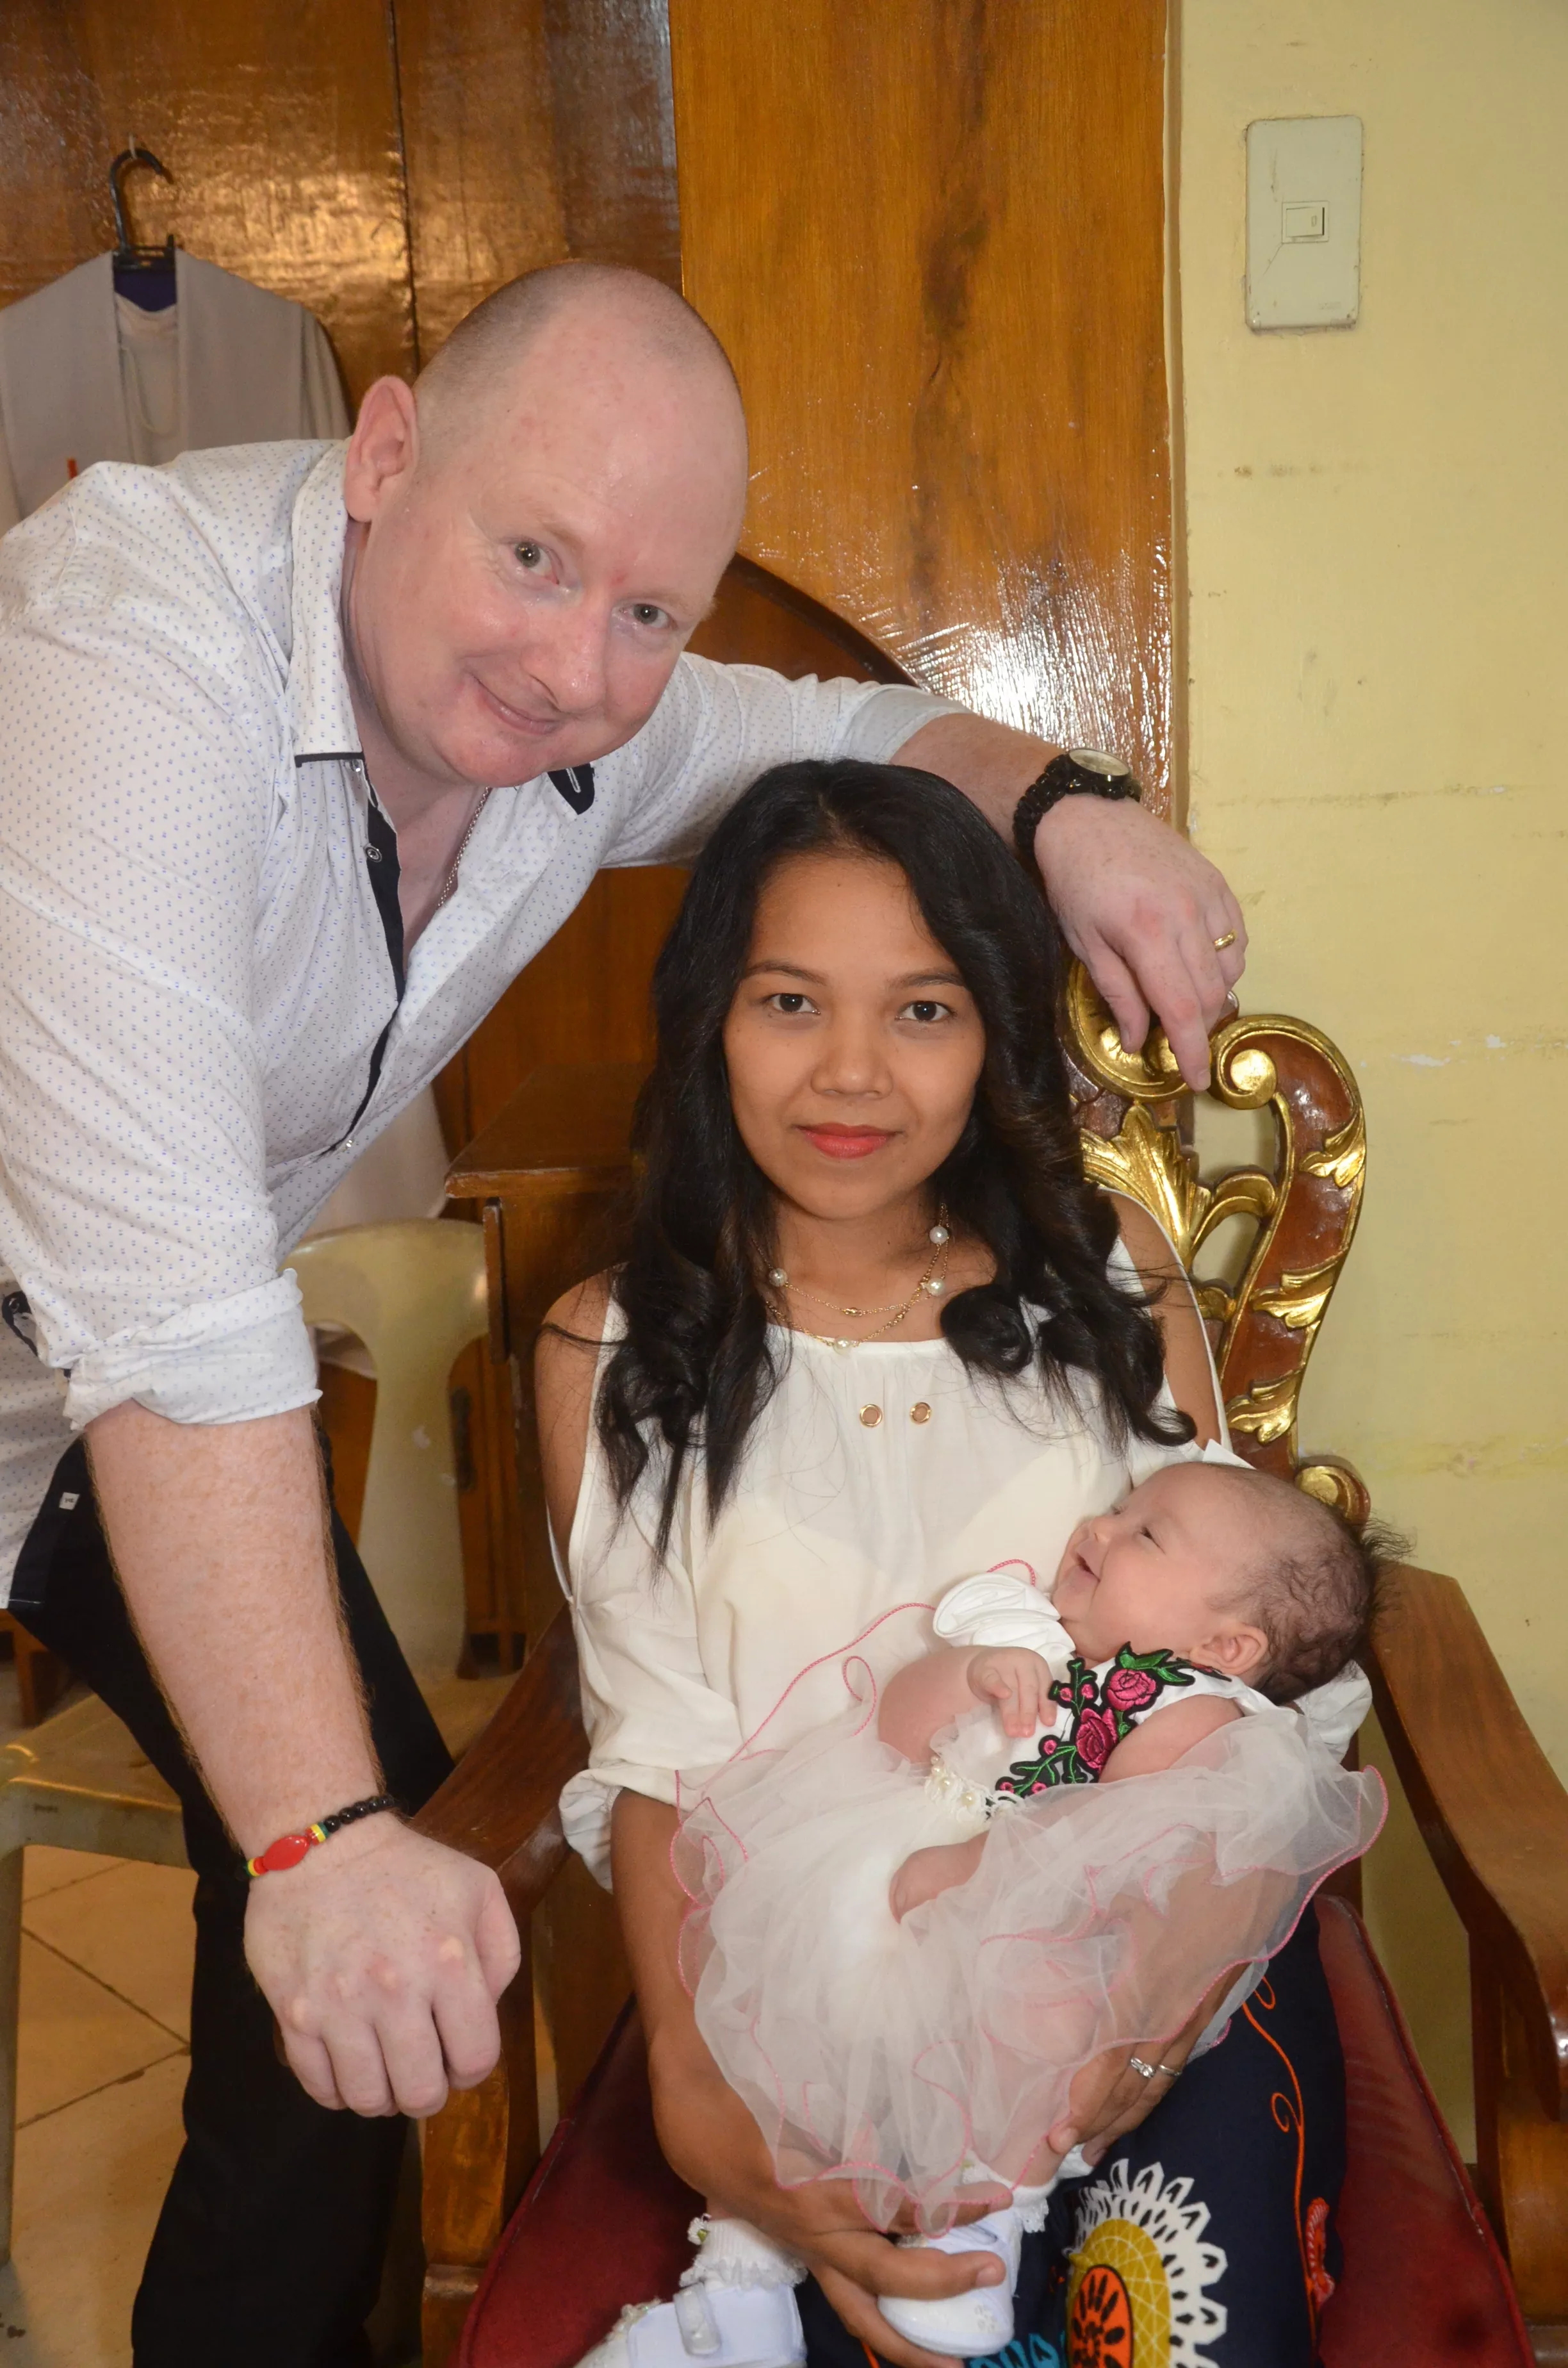 'I am over the moon': Cork man to be reunited with family after Dengue fever scare in the Philippines